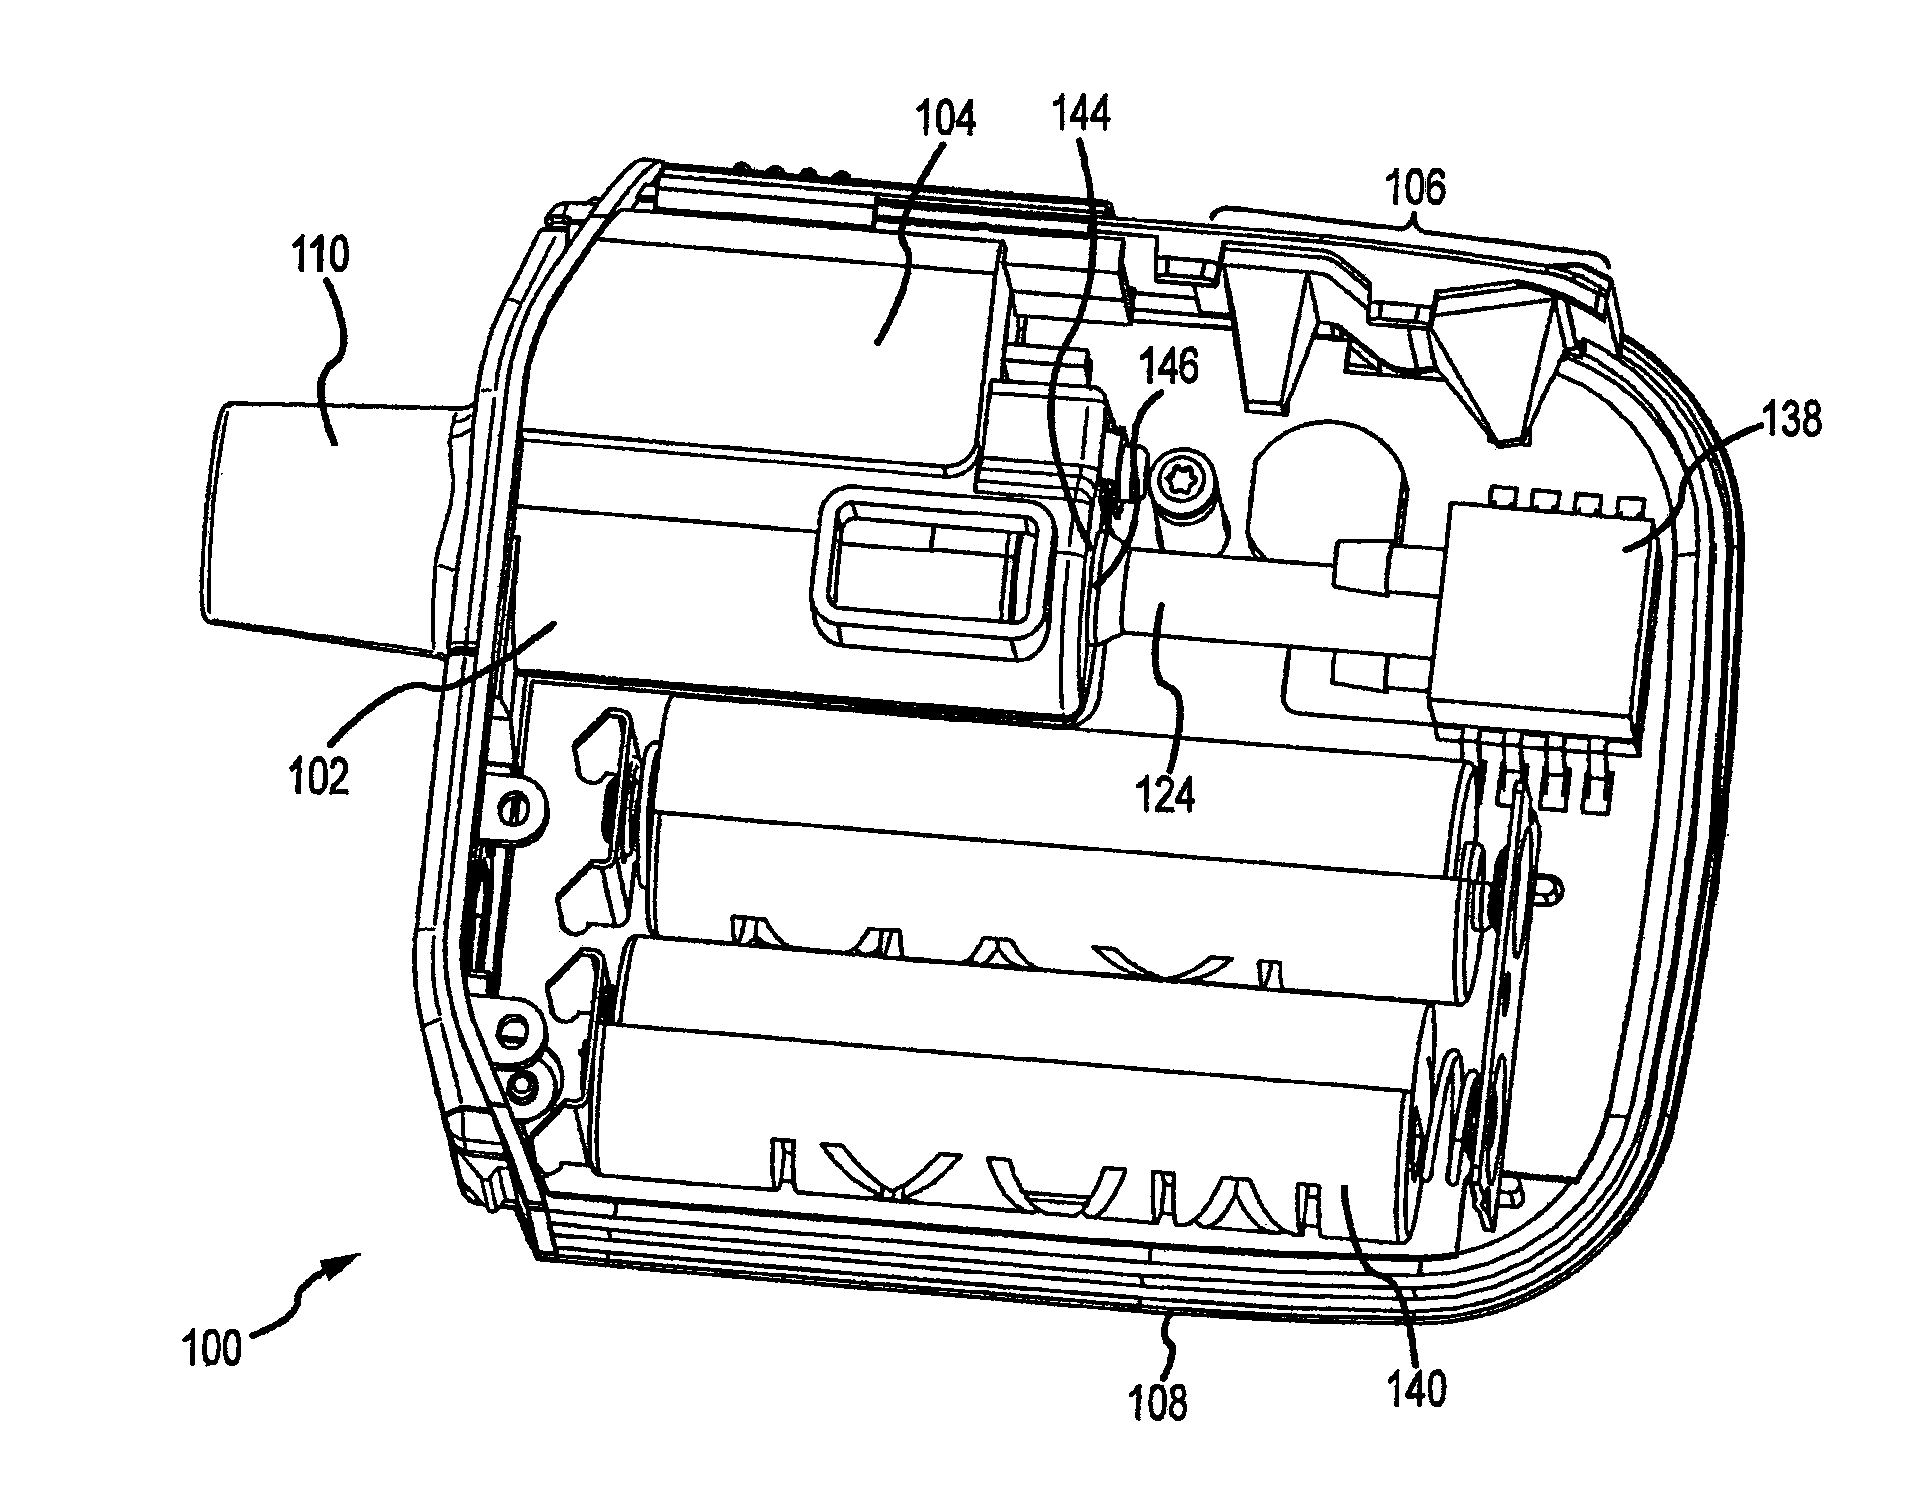 Aerosolization system with flow restrictor and feedback device